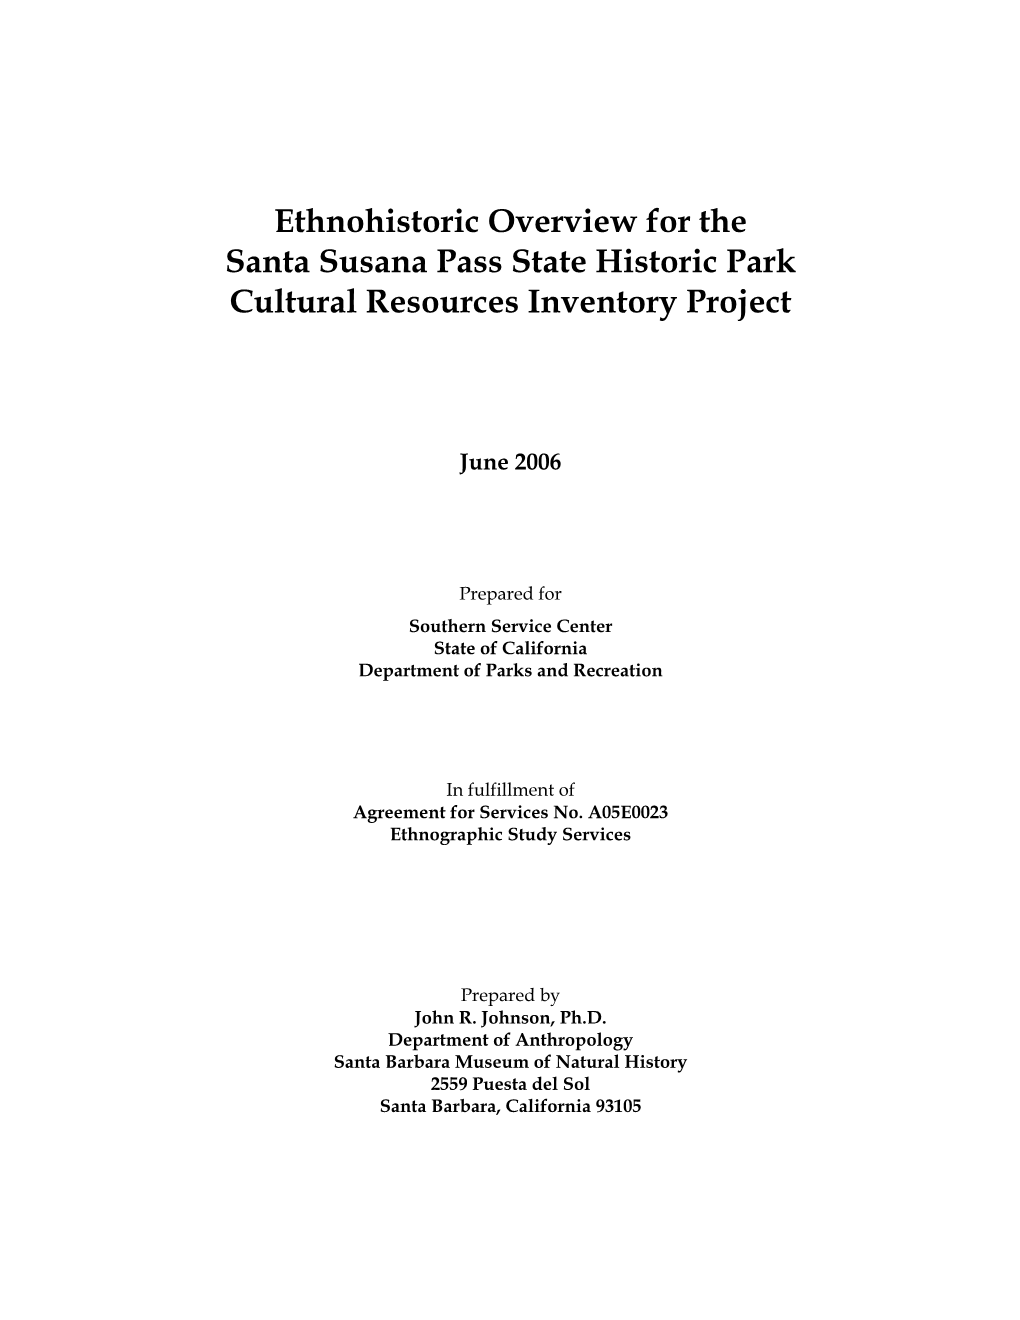 Ethnohistoric Overview for the Santa Susana Pass State Historic Park Cultural Resources Inventory Project